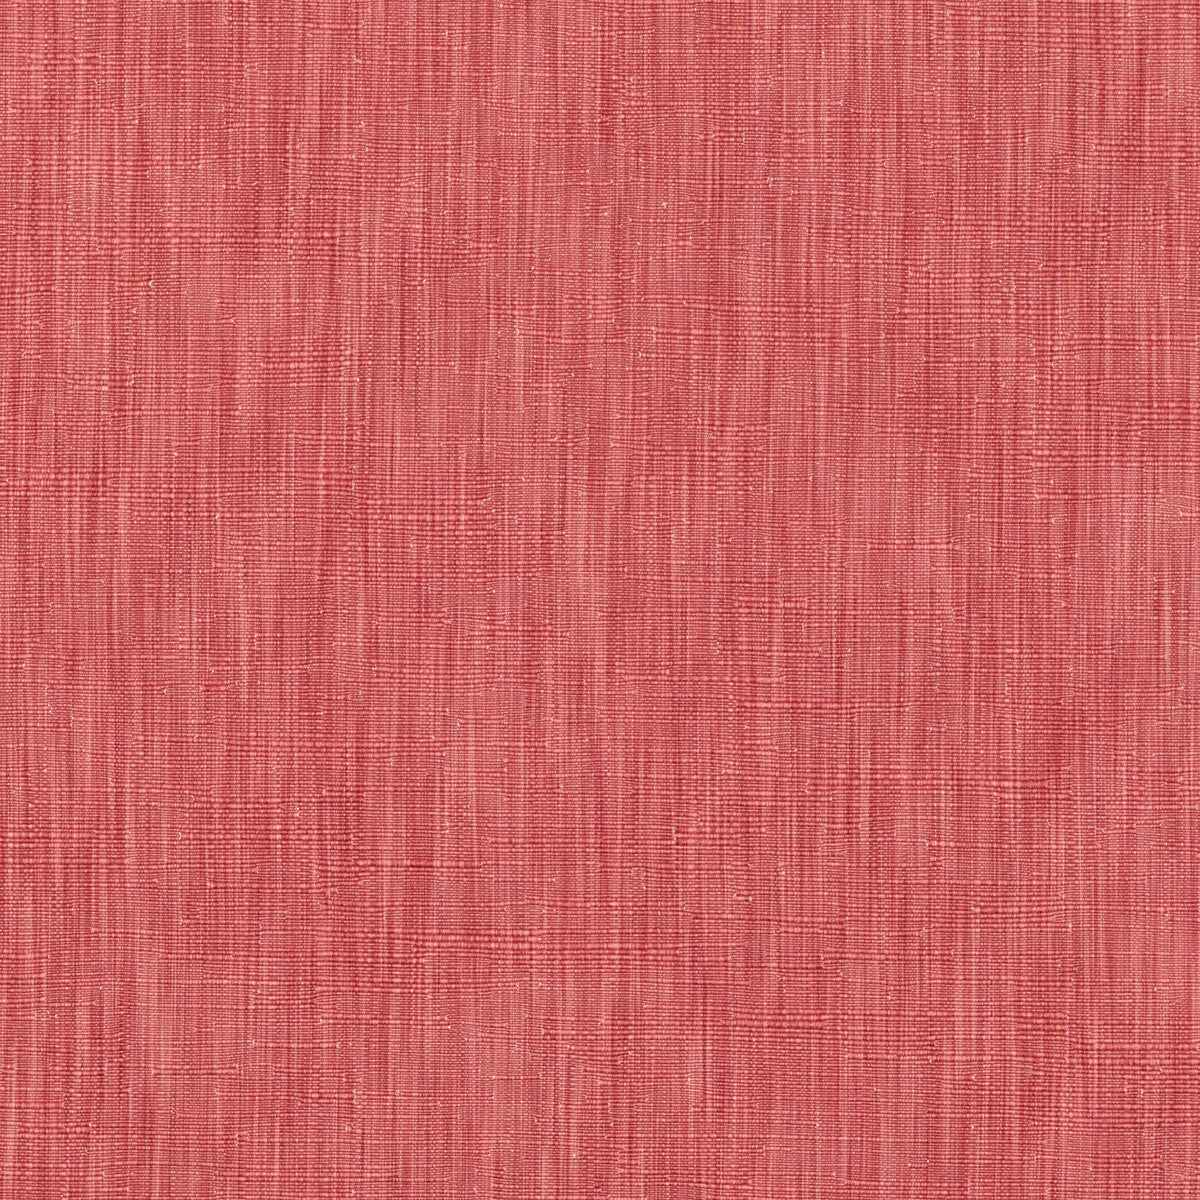 Saverne Texture fabric in rose color - pattern 8019122.197.0 - by Brunschwig &amp; Fils in the Alsace Weaves collection